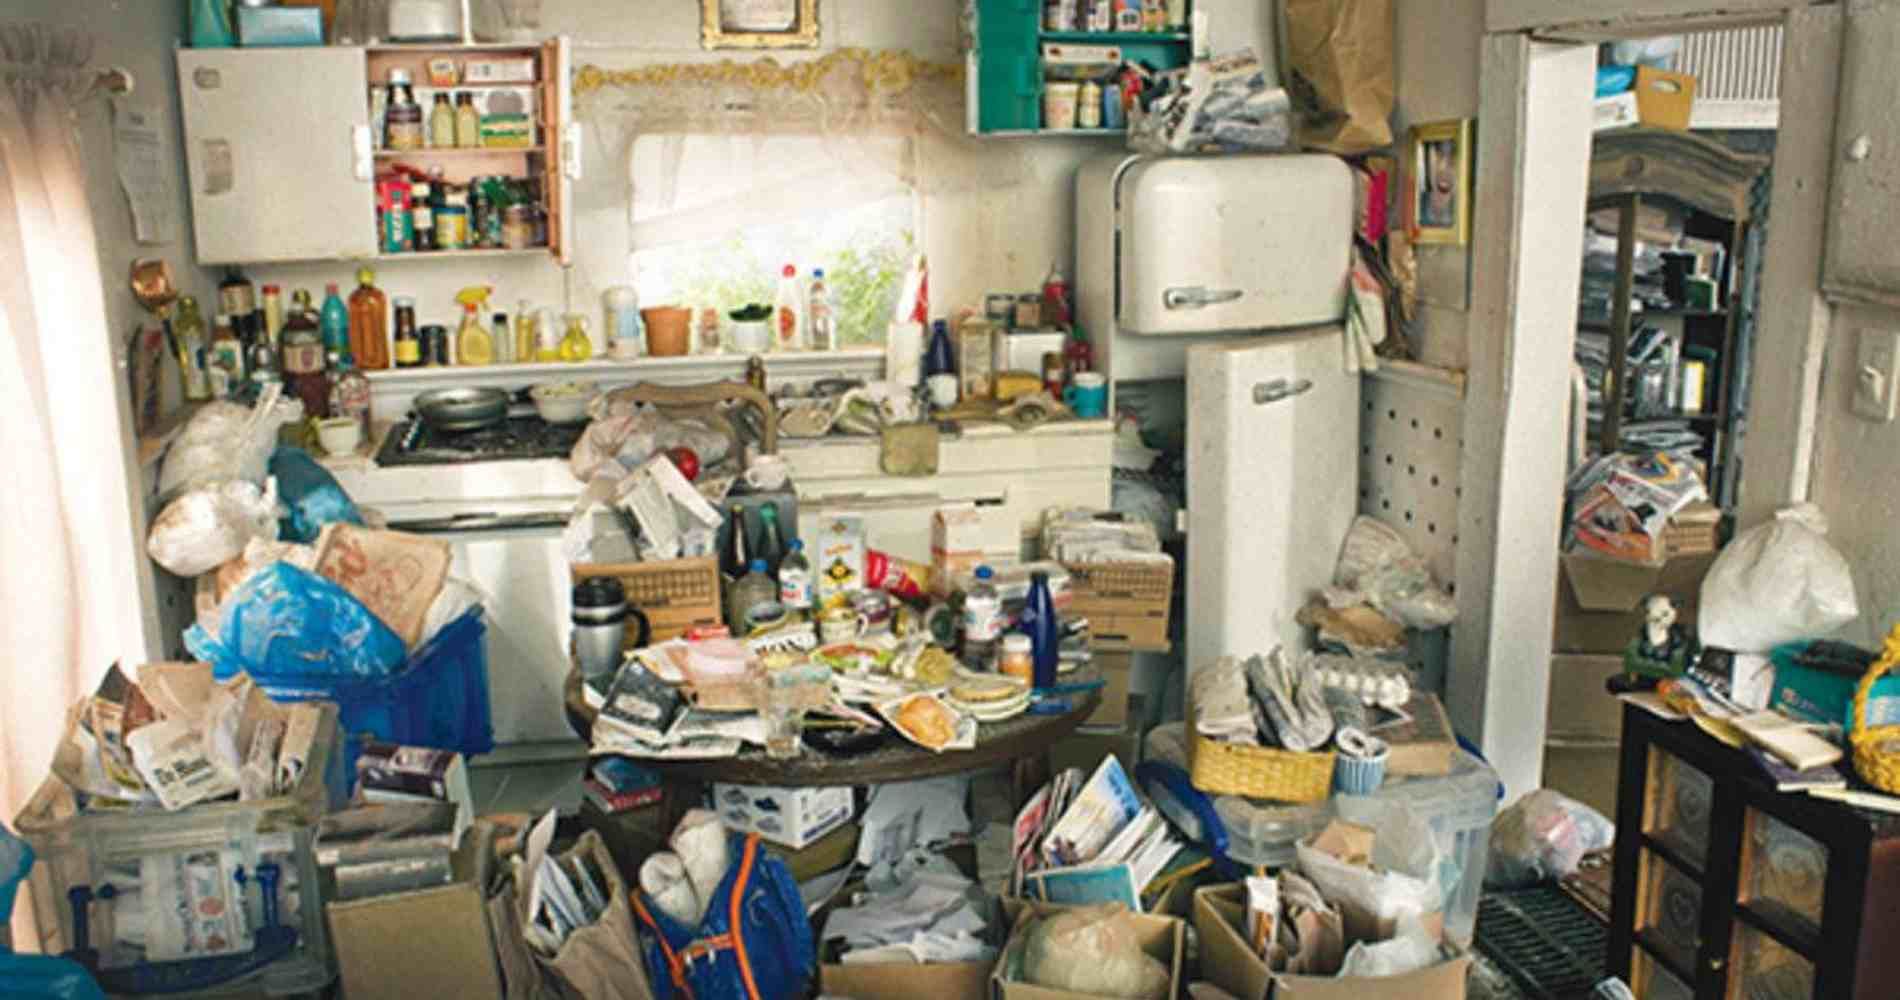 #1 for Hoarding Cleanup in Litchfield Park, AZ with Over 1200 5-Star Reviews!